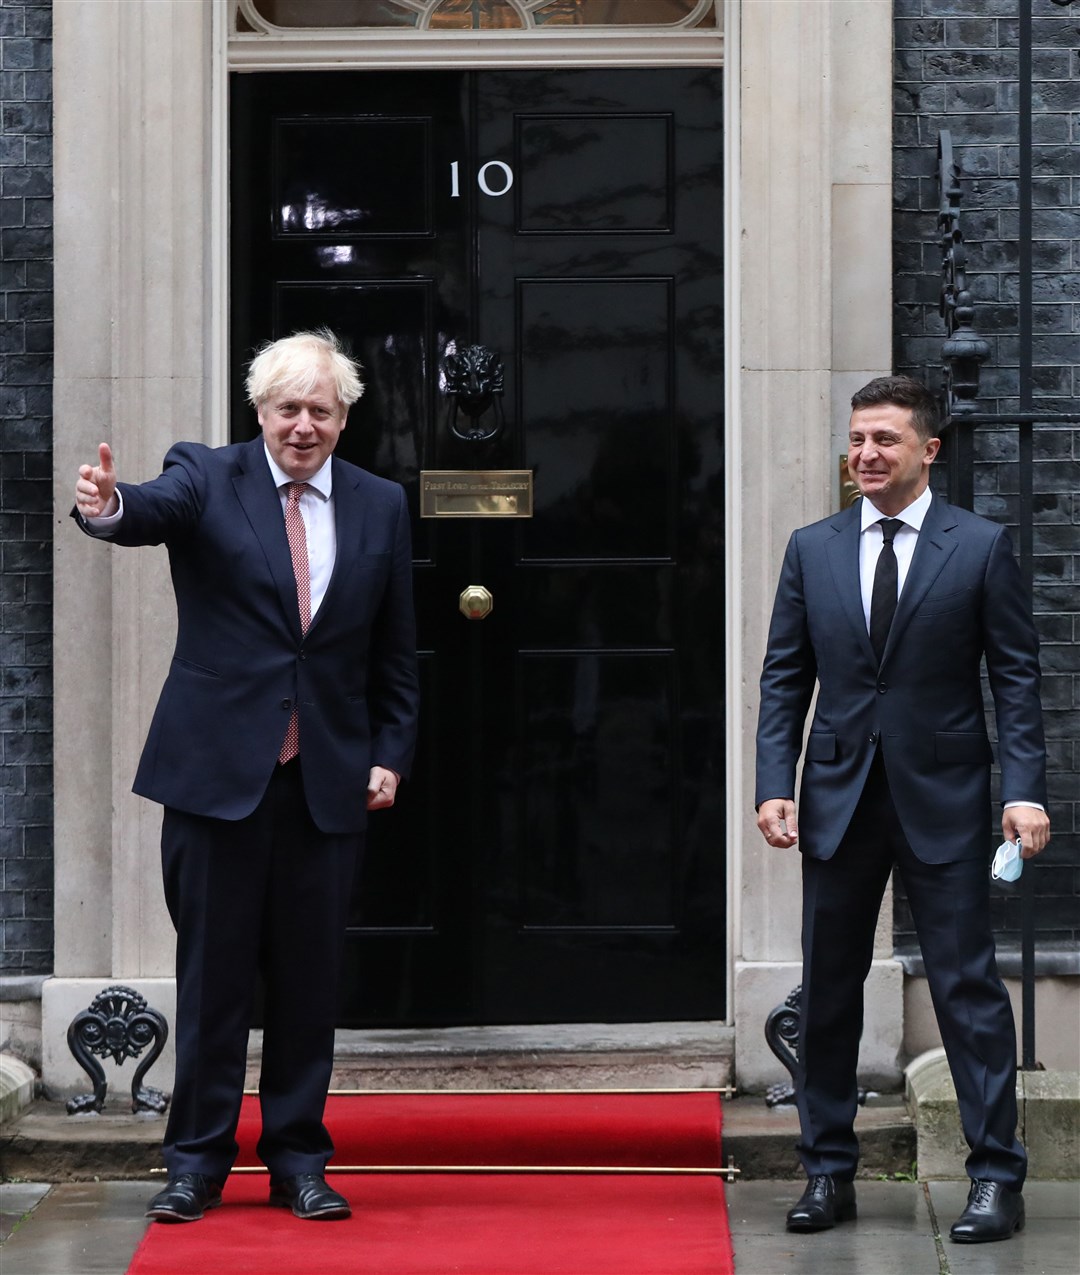 Prime Minister Boris Johnson (left) welcomes the President of Ukraine, Volodymyr Zelenskyy, to Downing Street (Aaron Chown/PA)